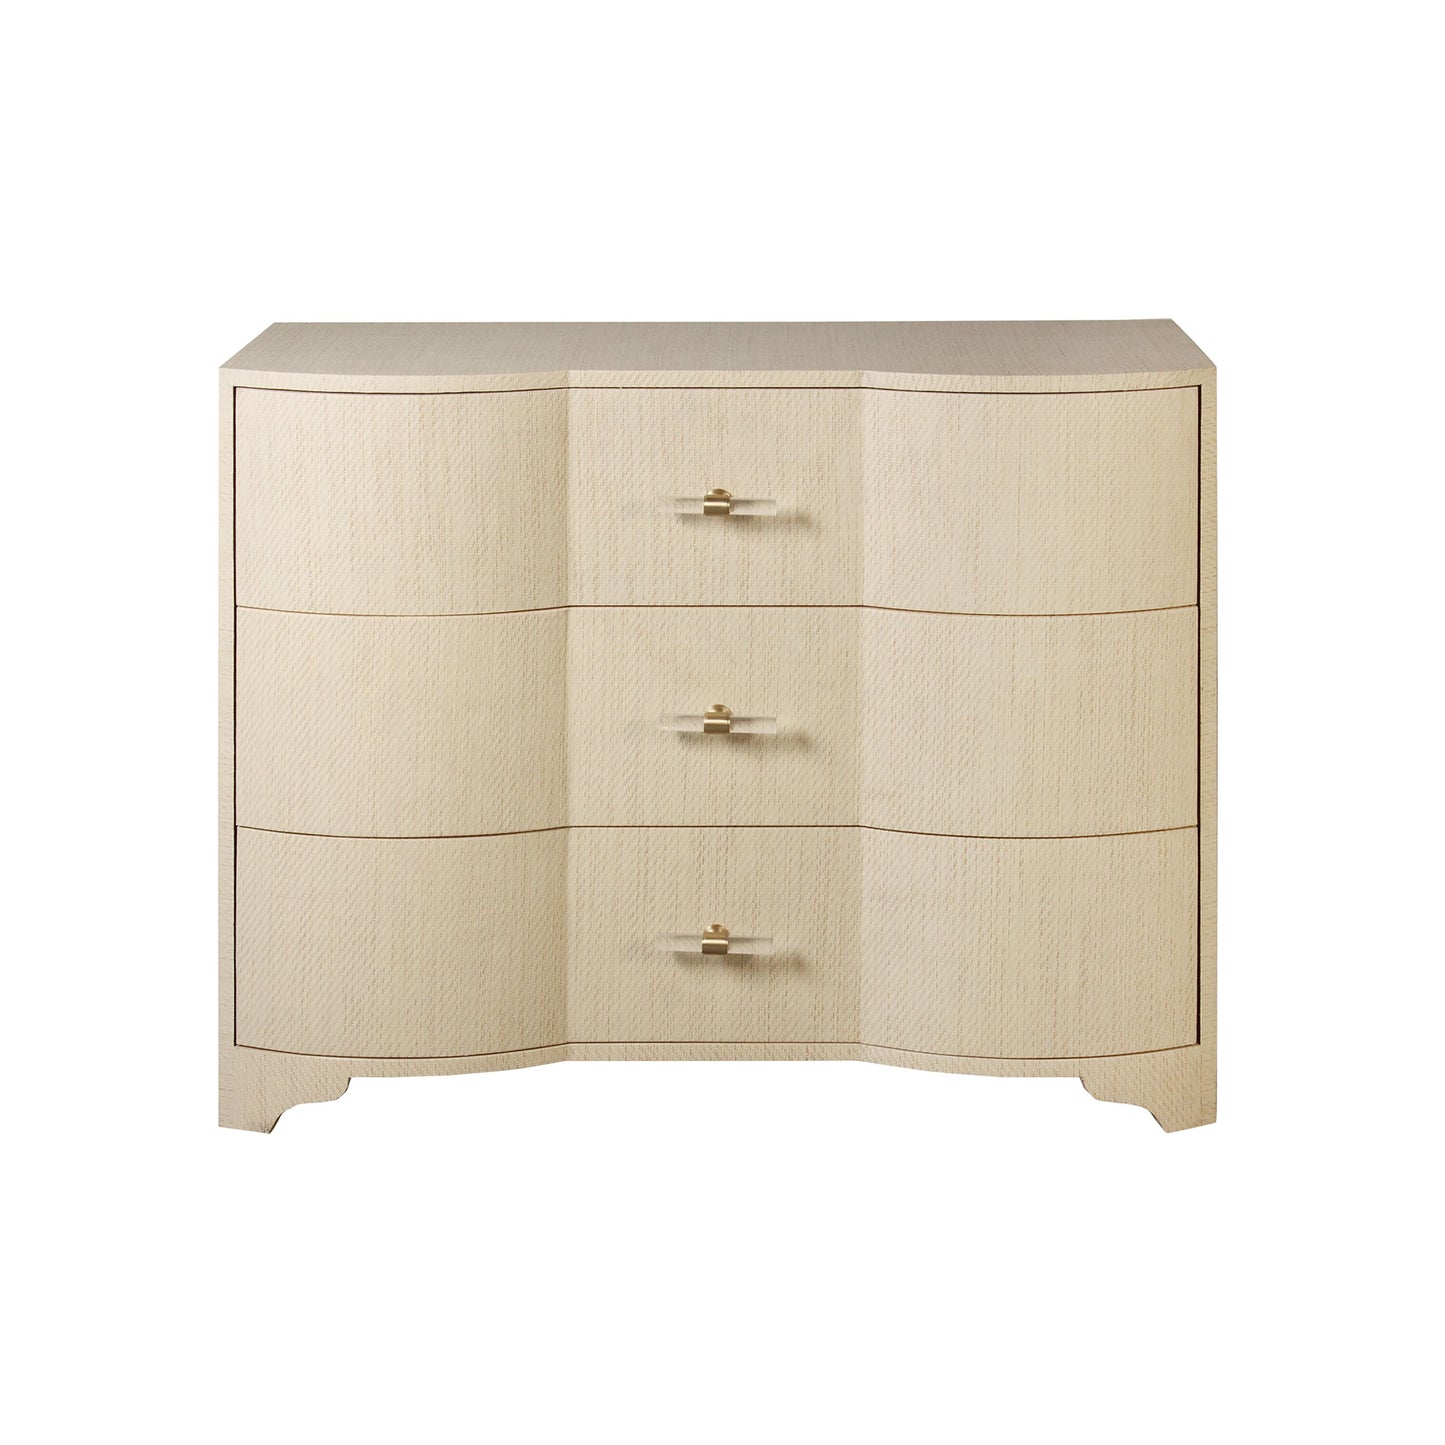 worlds away plymouth chest natural grasscloth